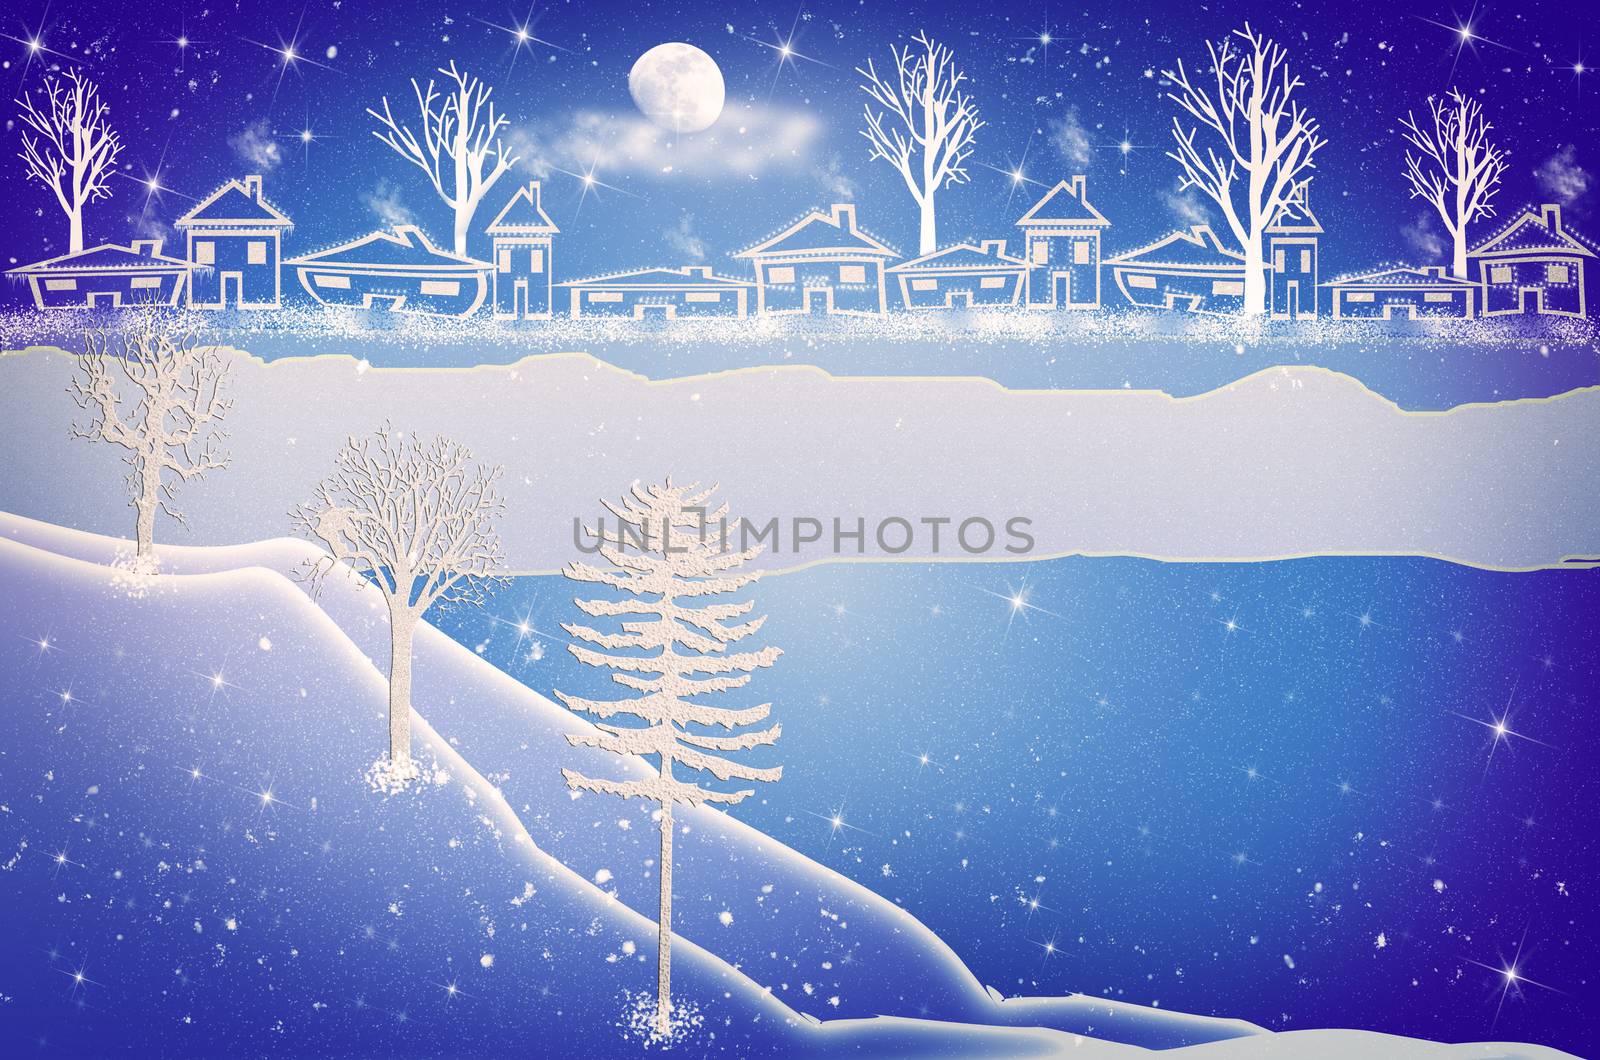 City landscape with winter houses. Greeting card with a beautiful snowy cottages. New year poster with copy space. Stock illustration